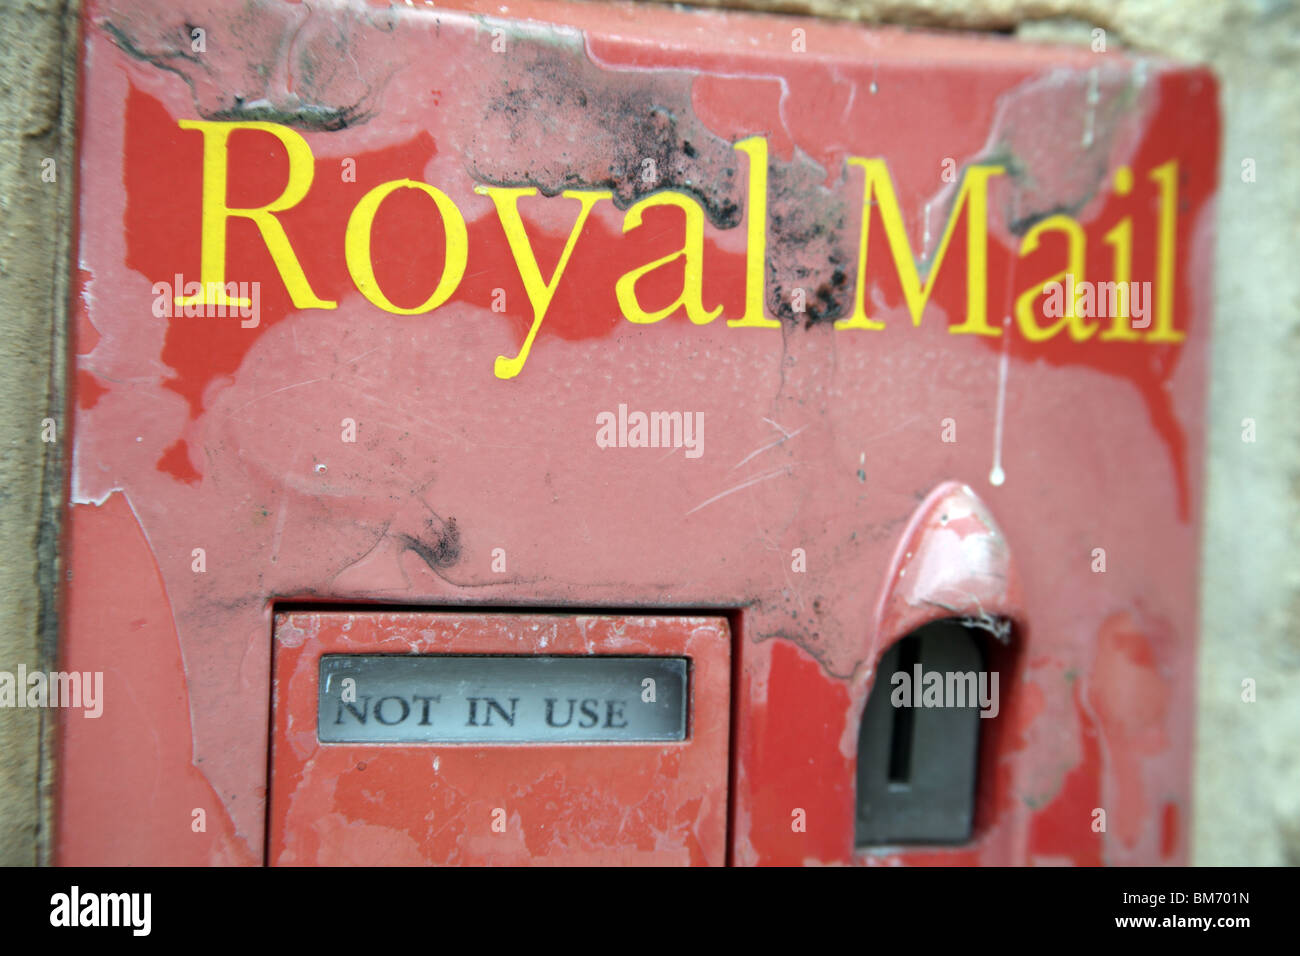 Royal Mail Not in Use Stock Photo